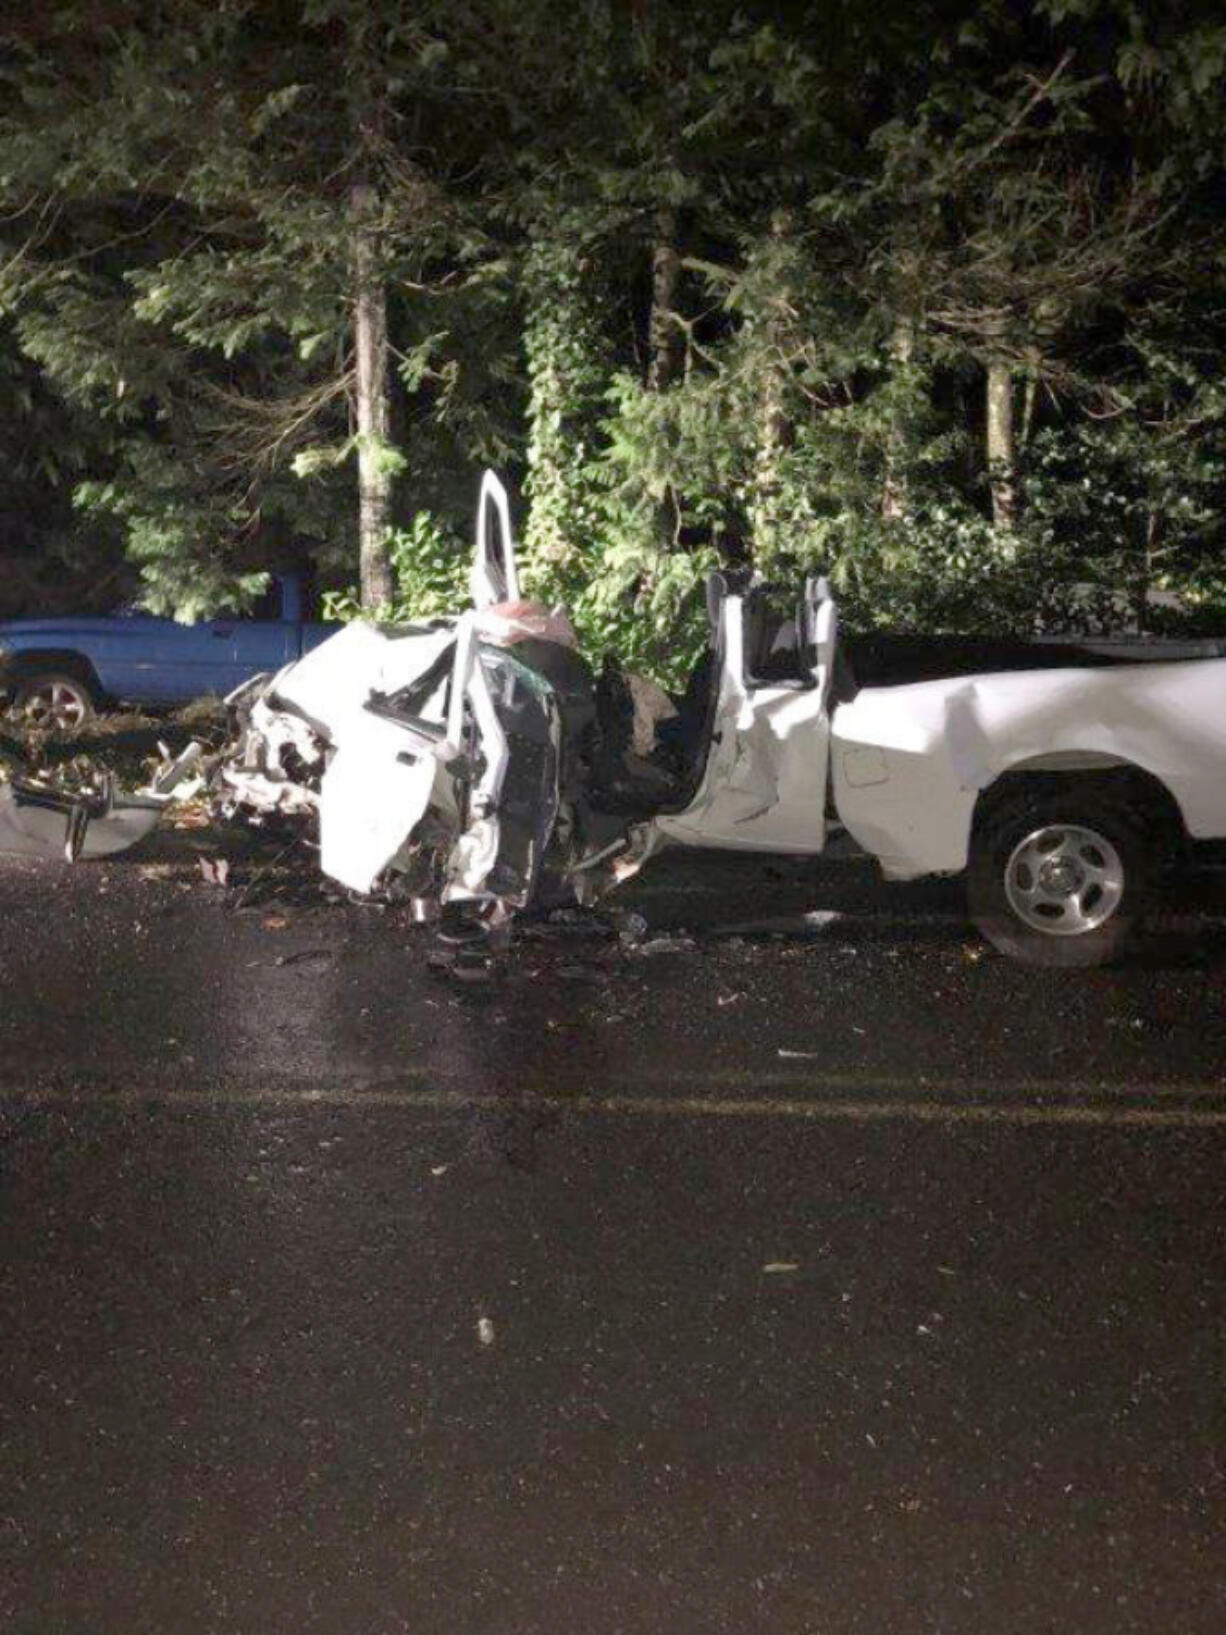 A truck crashed Sunday near the 35000 block of Northeast Washougal River Road. The Clark County Sheriff's Office identified the driver who was killed in the crash as Corey Hermance of Camas.